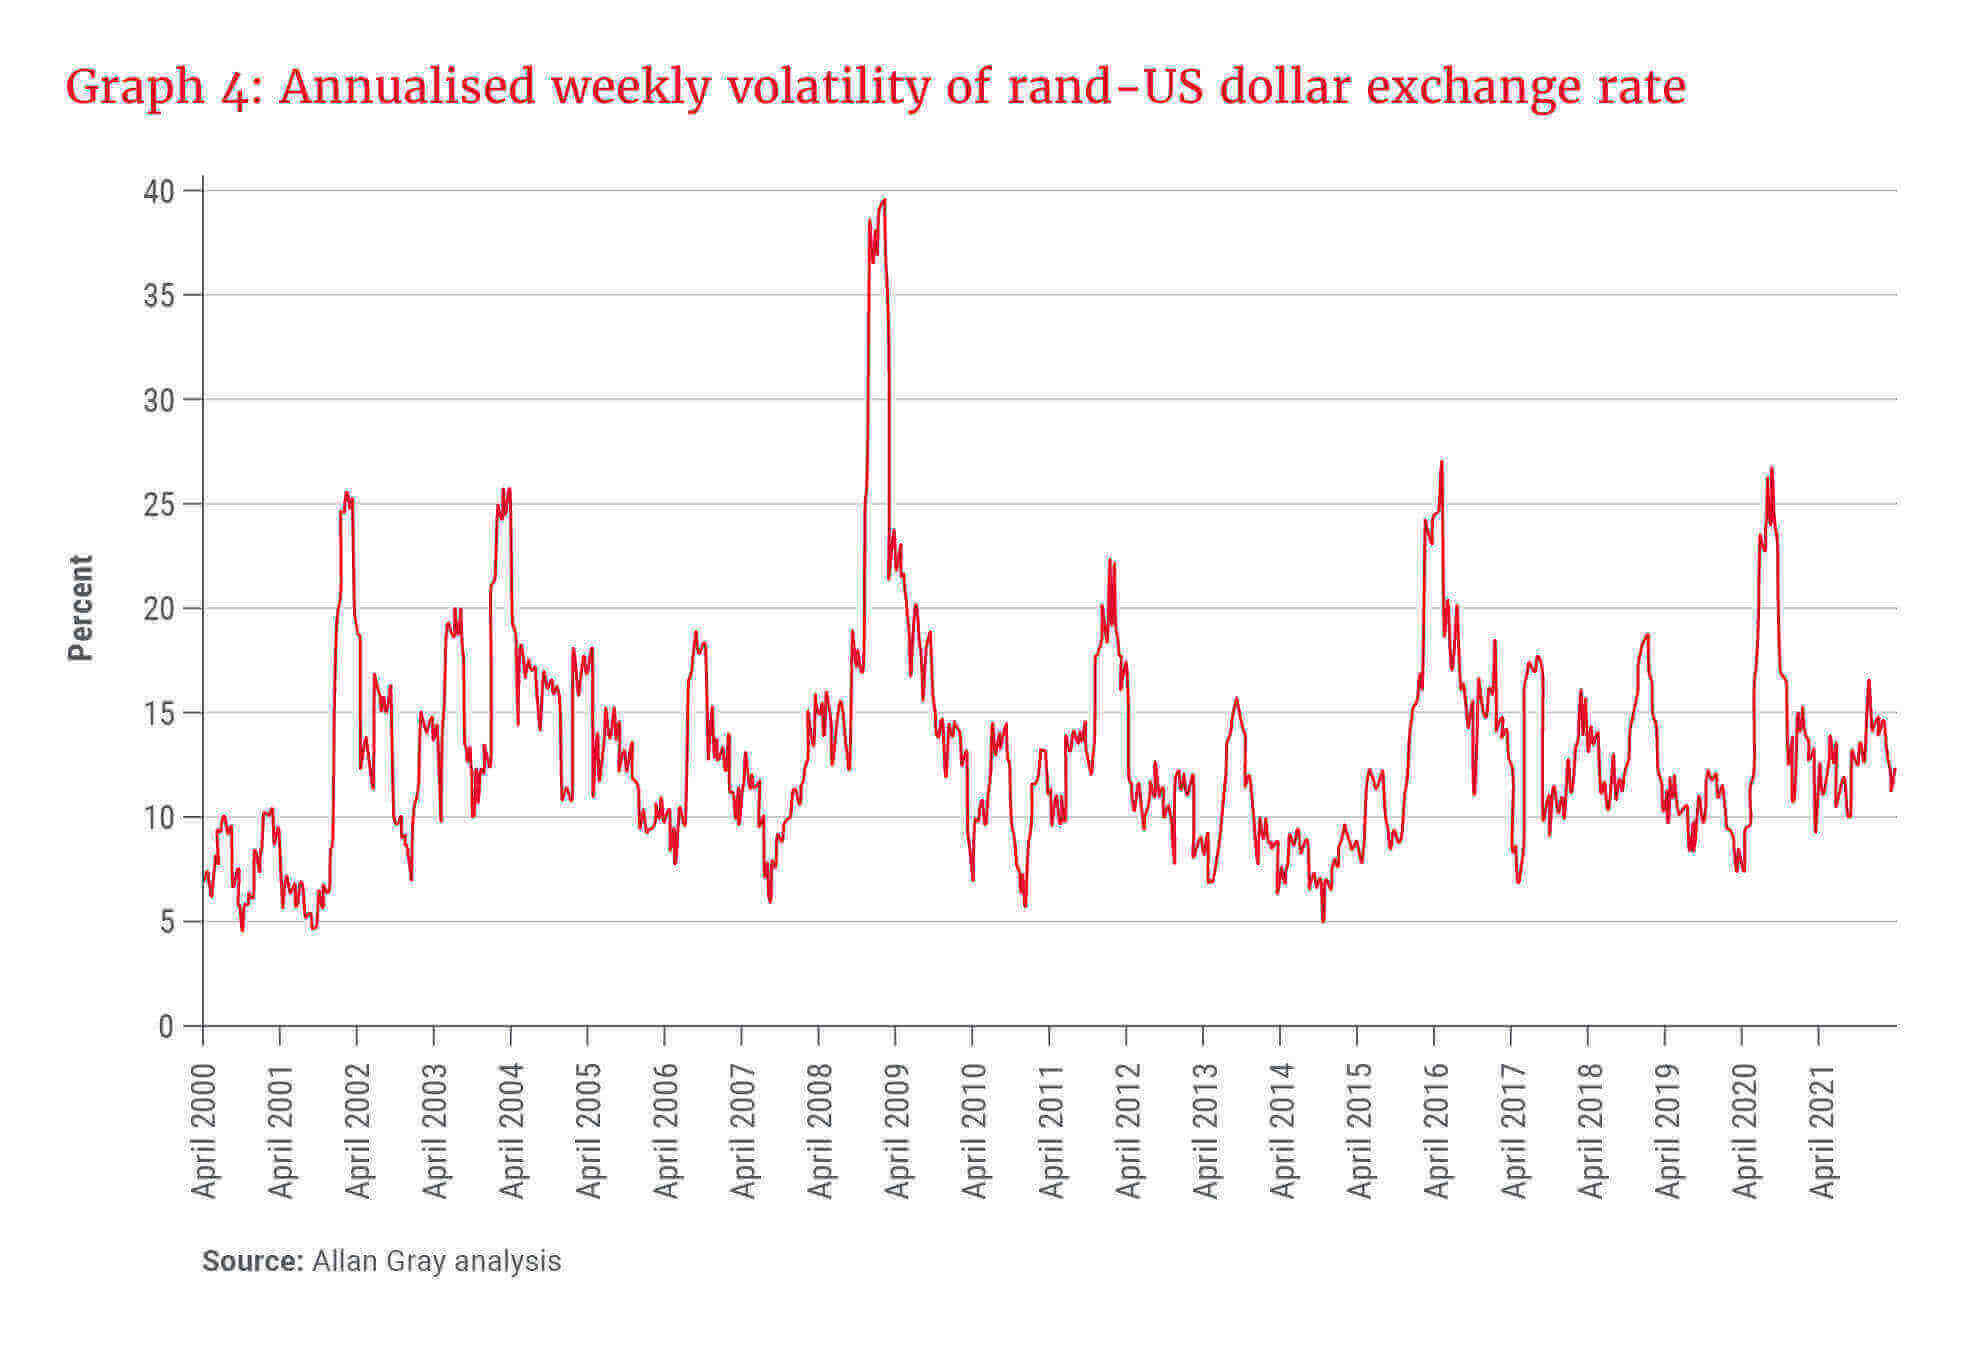 Graph 4_Annualised weekly volatility of rand-US dollar exchange rate.jpg